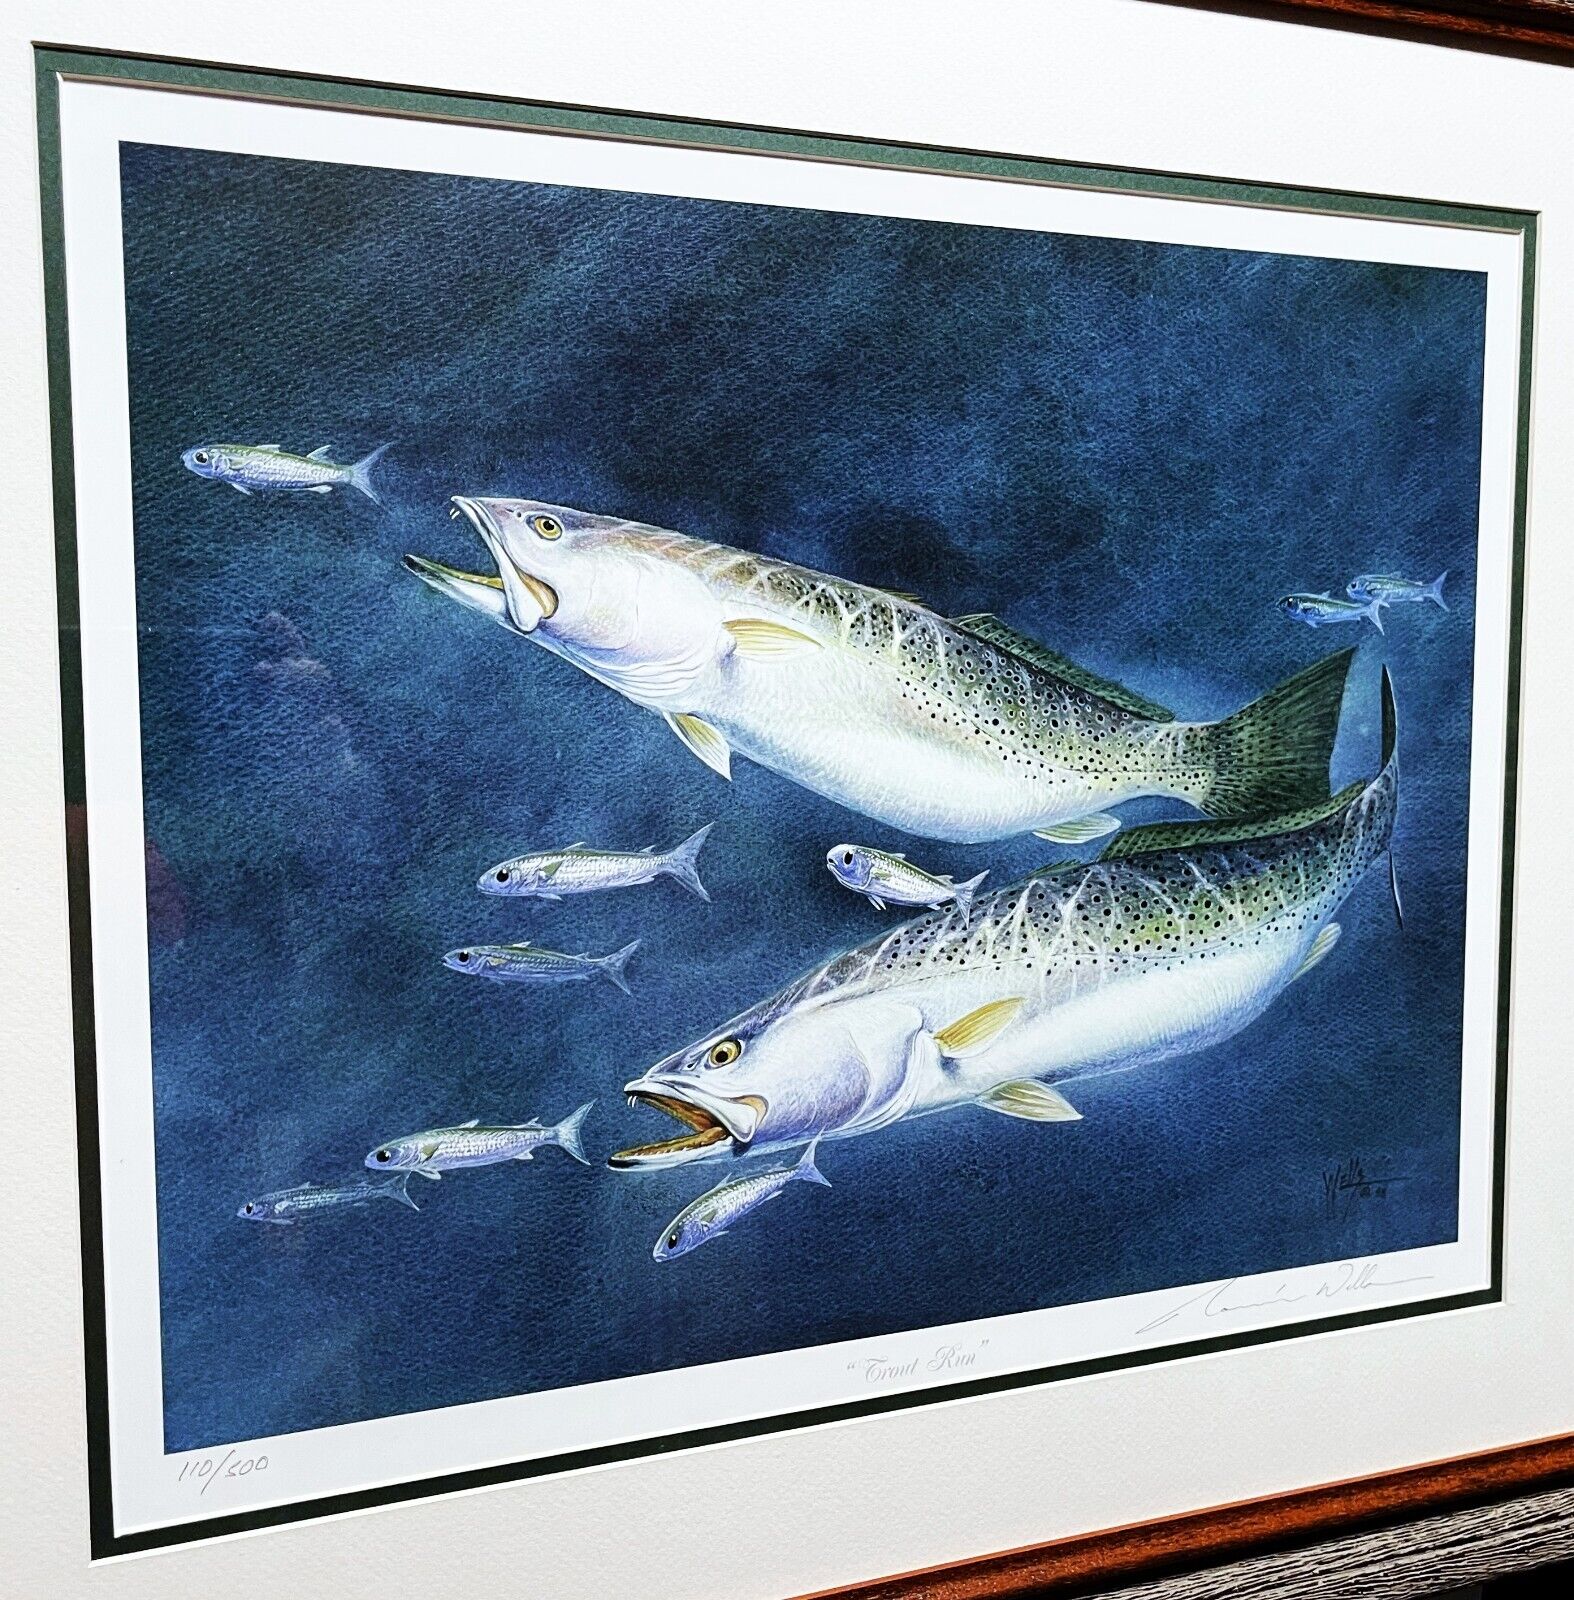 Ronnie Wells Trout Run Lithograph Speckled Trout Mint - Brand New Sporting Frame Без бренда - фотография #2